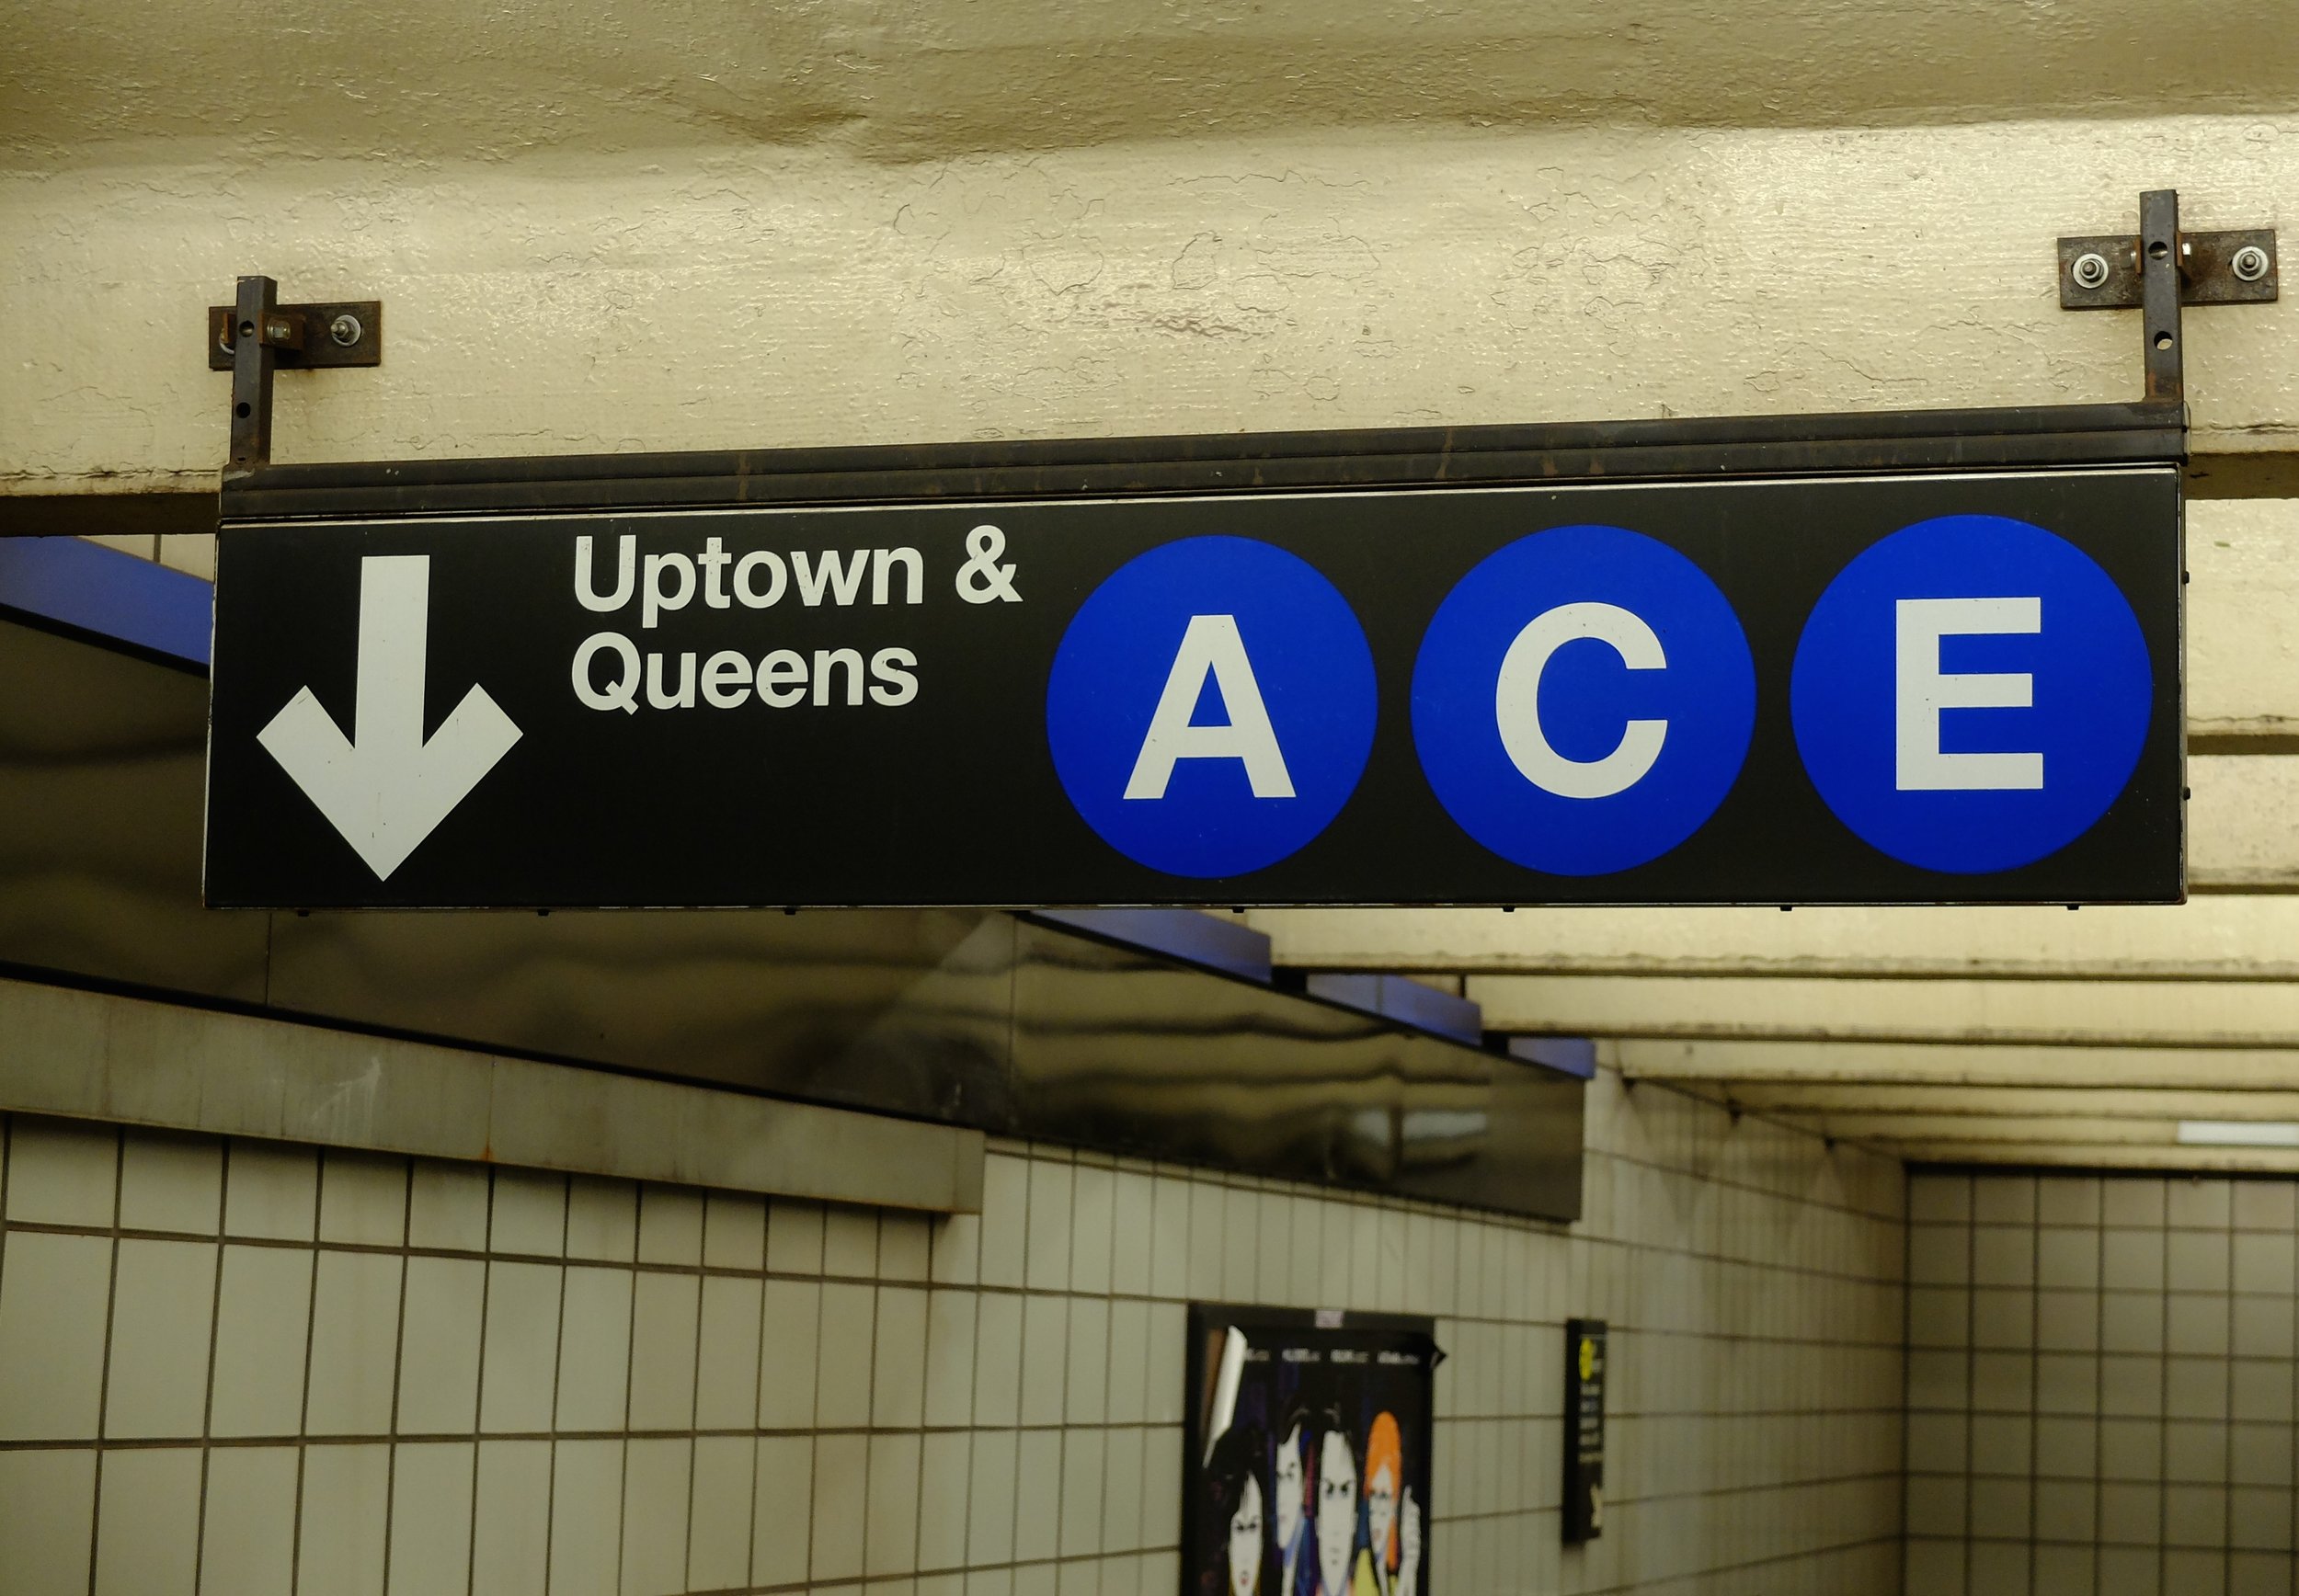 This blog will be about some history &amp; subway entrances.